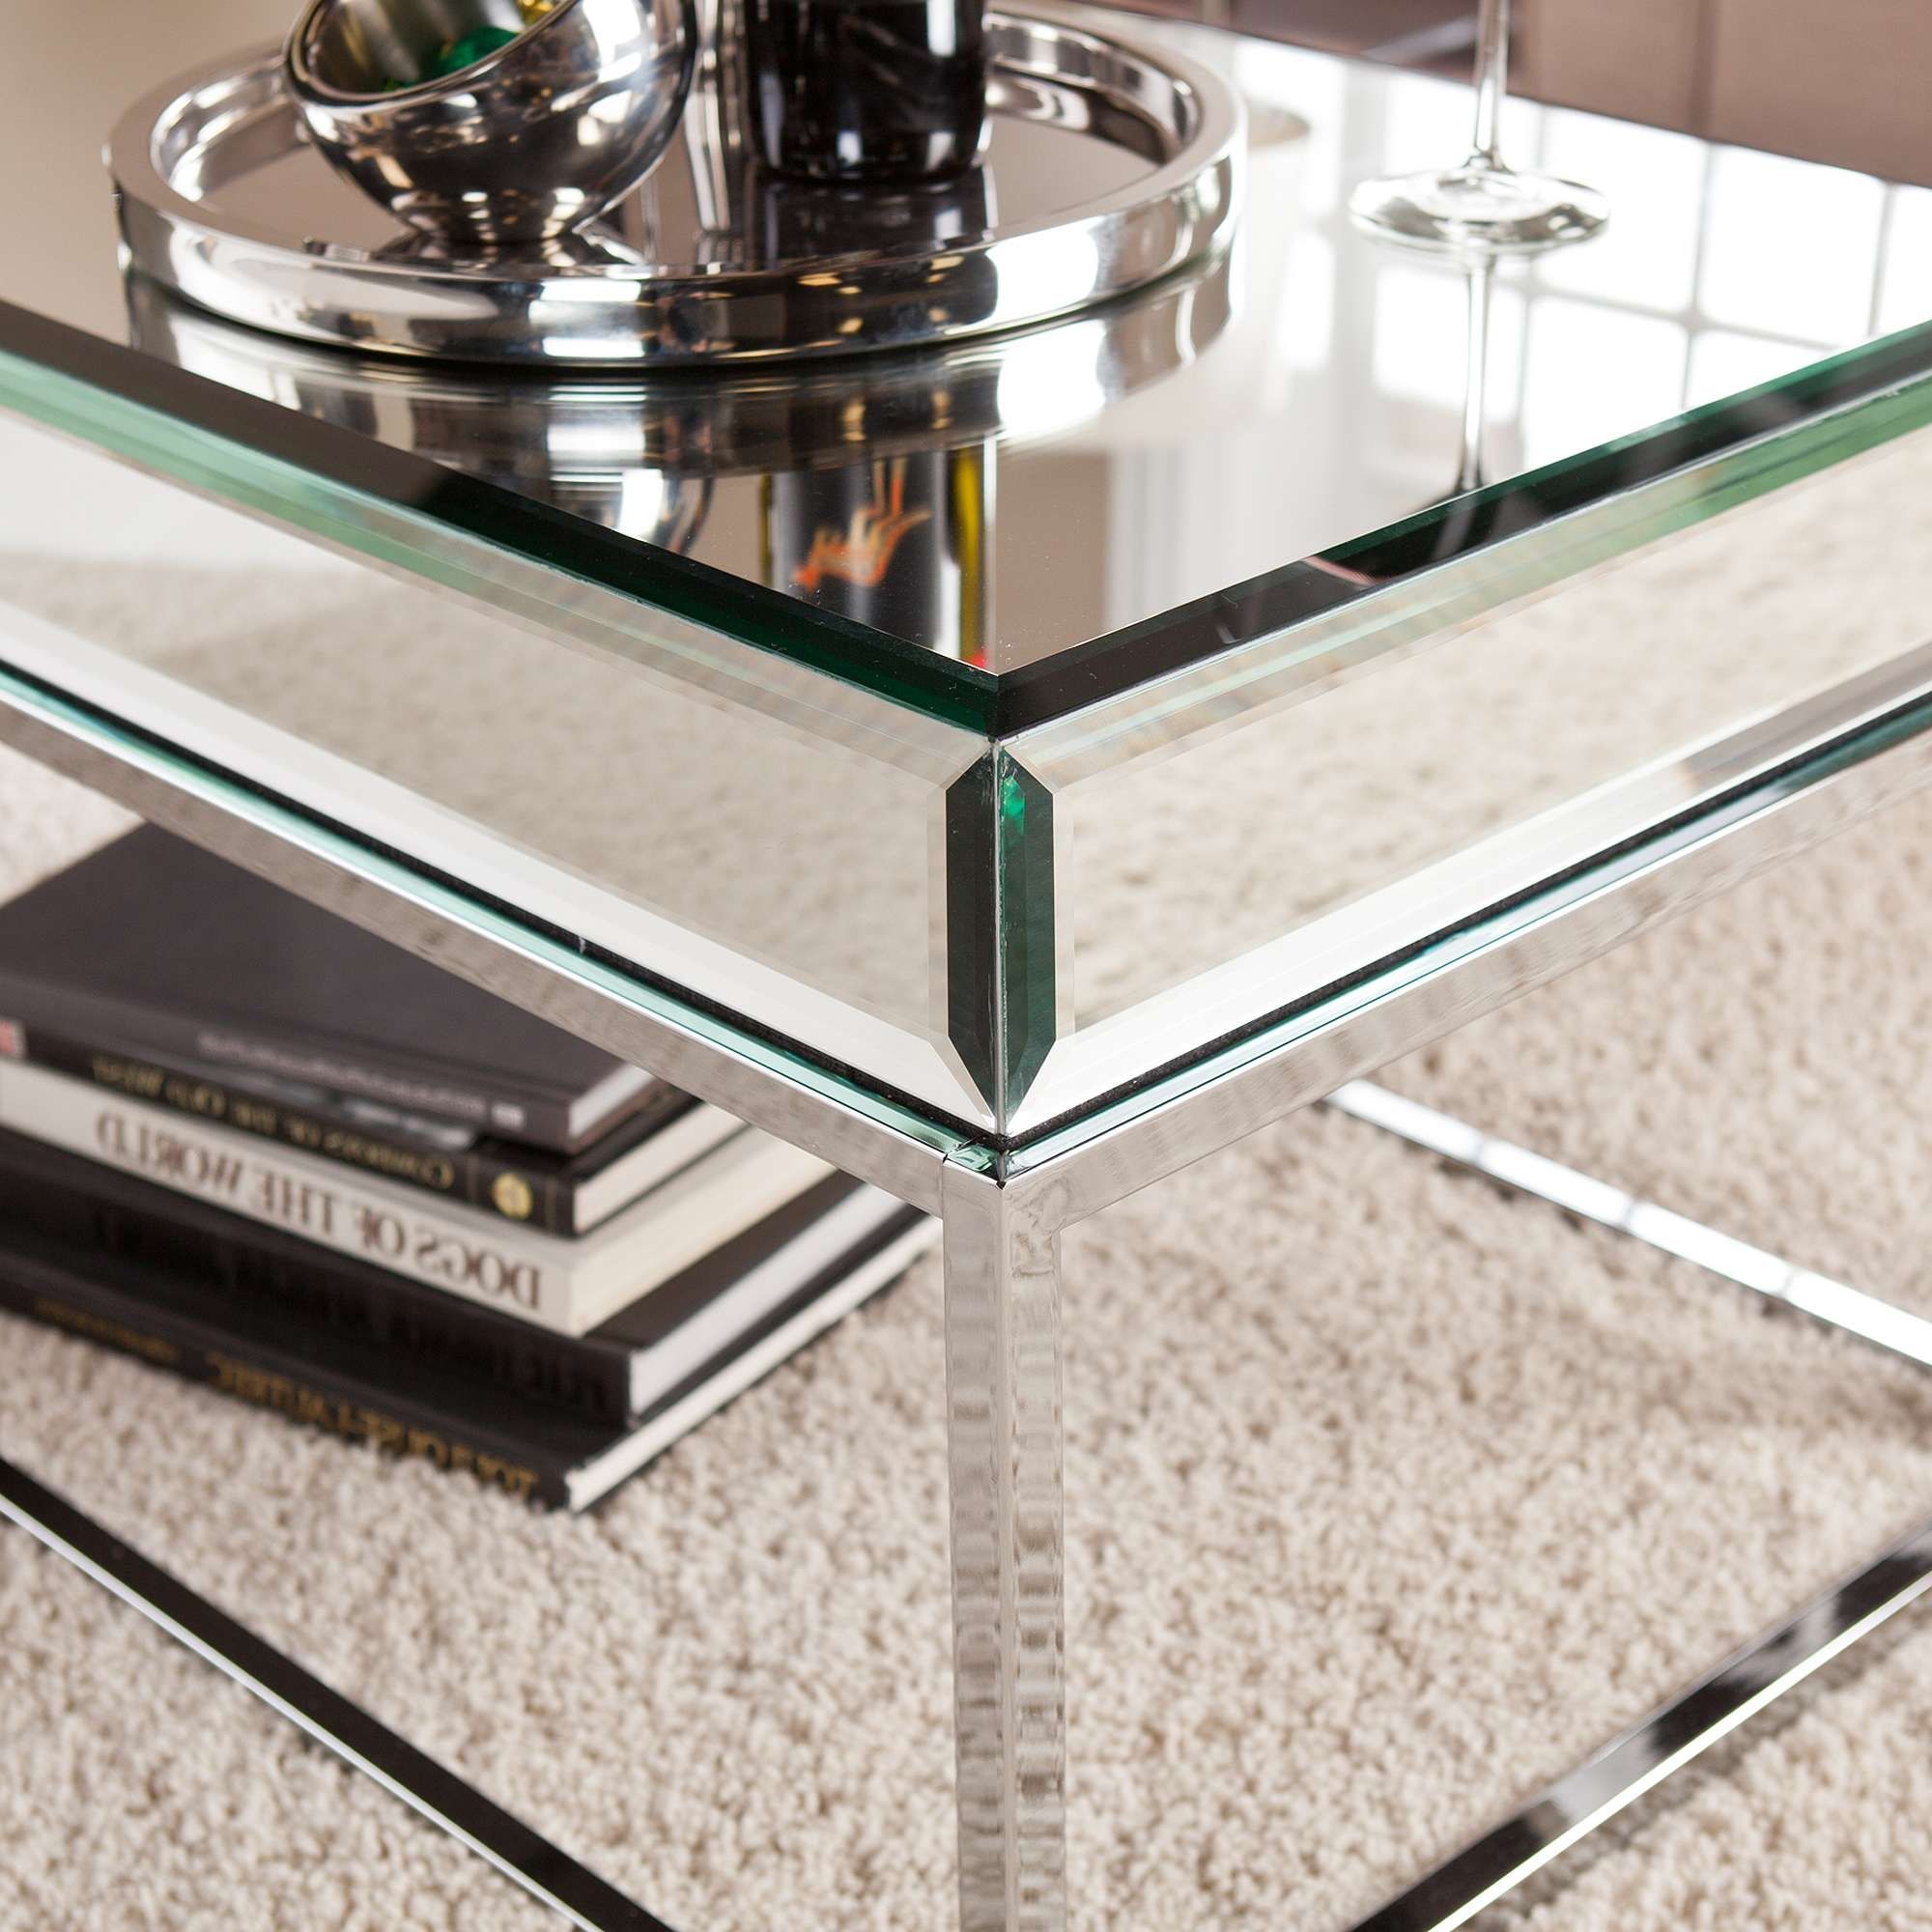 Stassi Coffee Table, Mirrored – Walmart With Regard To Current Mirrored Coffee Tables (View 1 of 20)